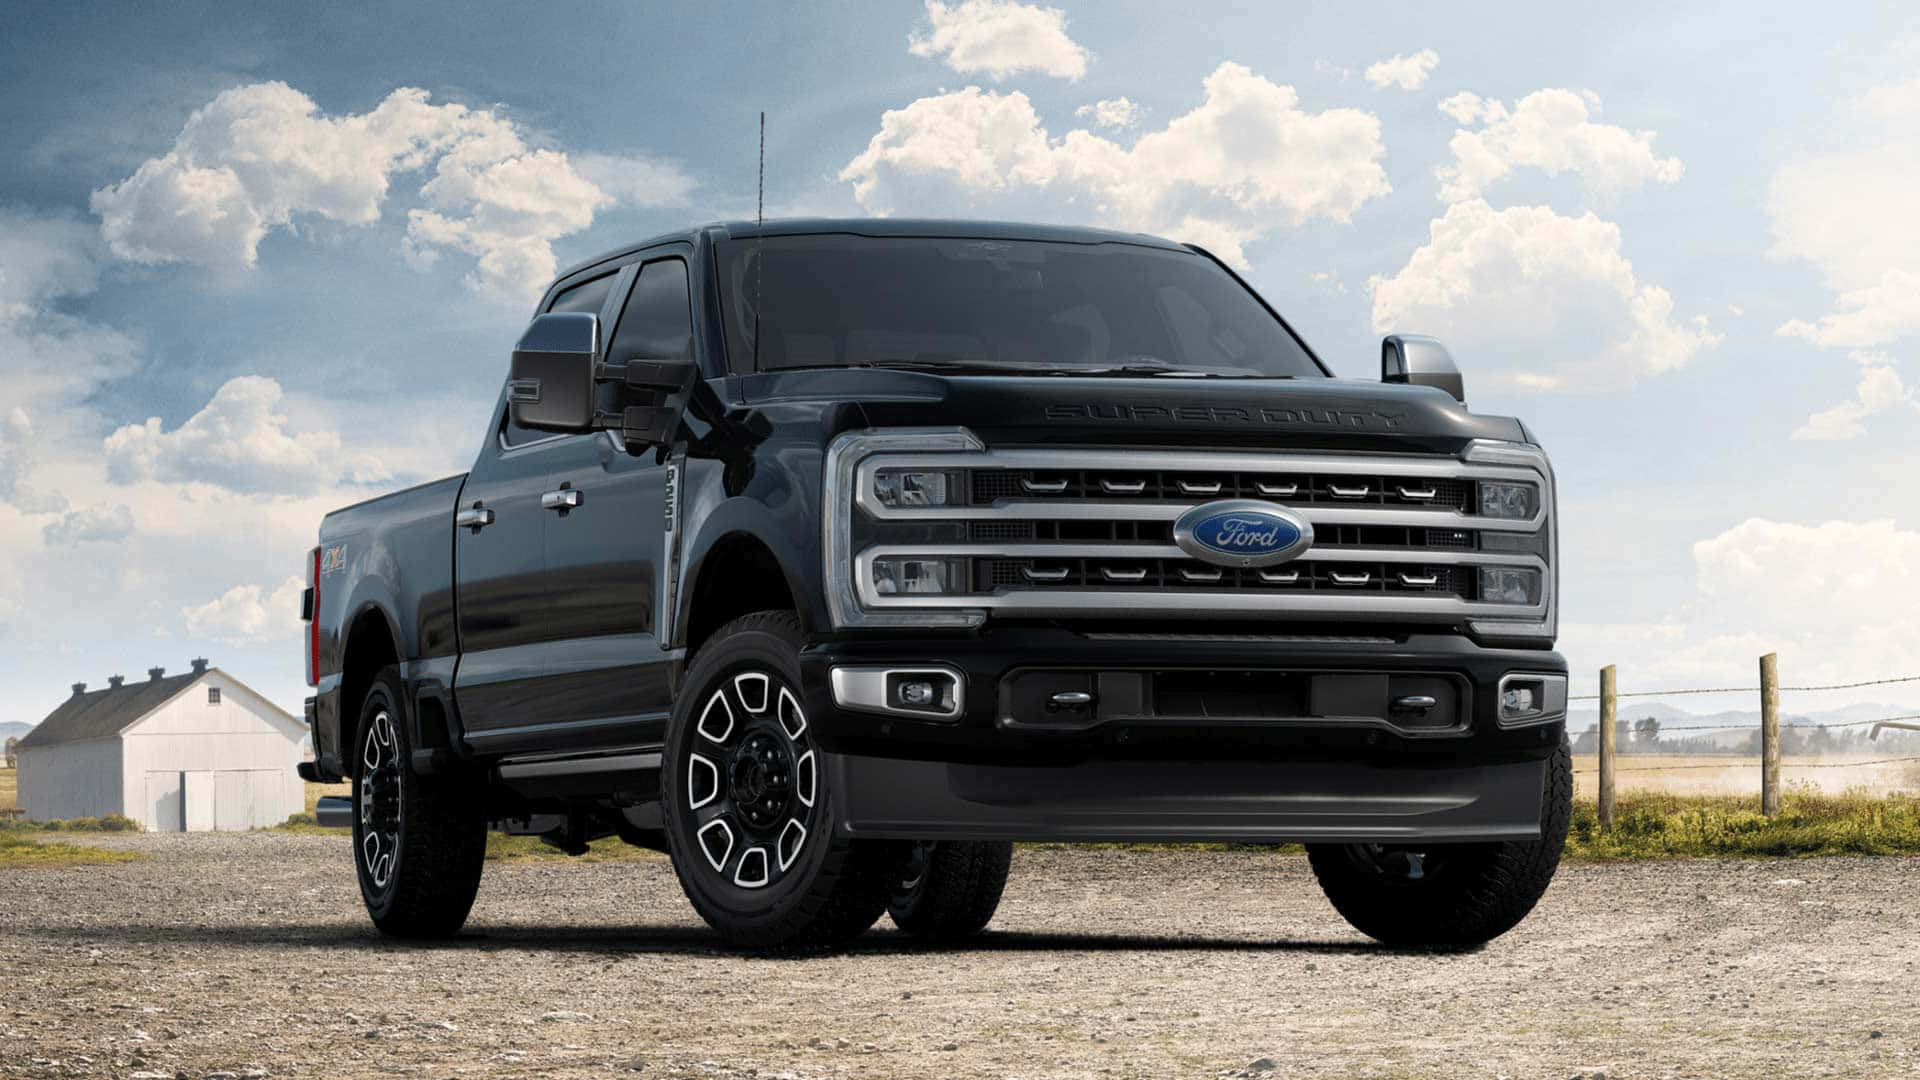 "A Ford Powerstroke Diesel, Ready for Any Job" Wallpaper